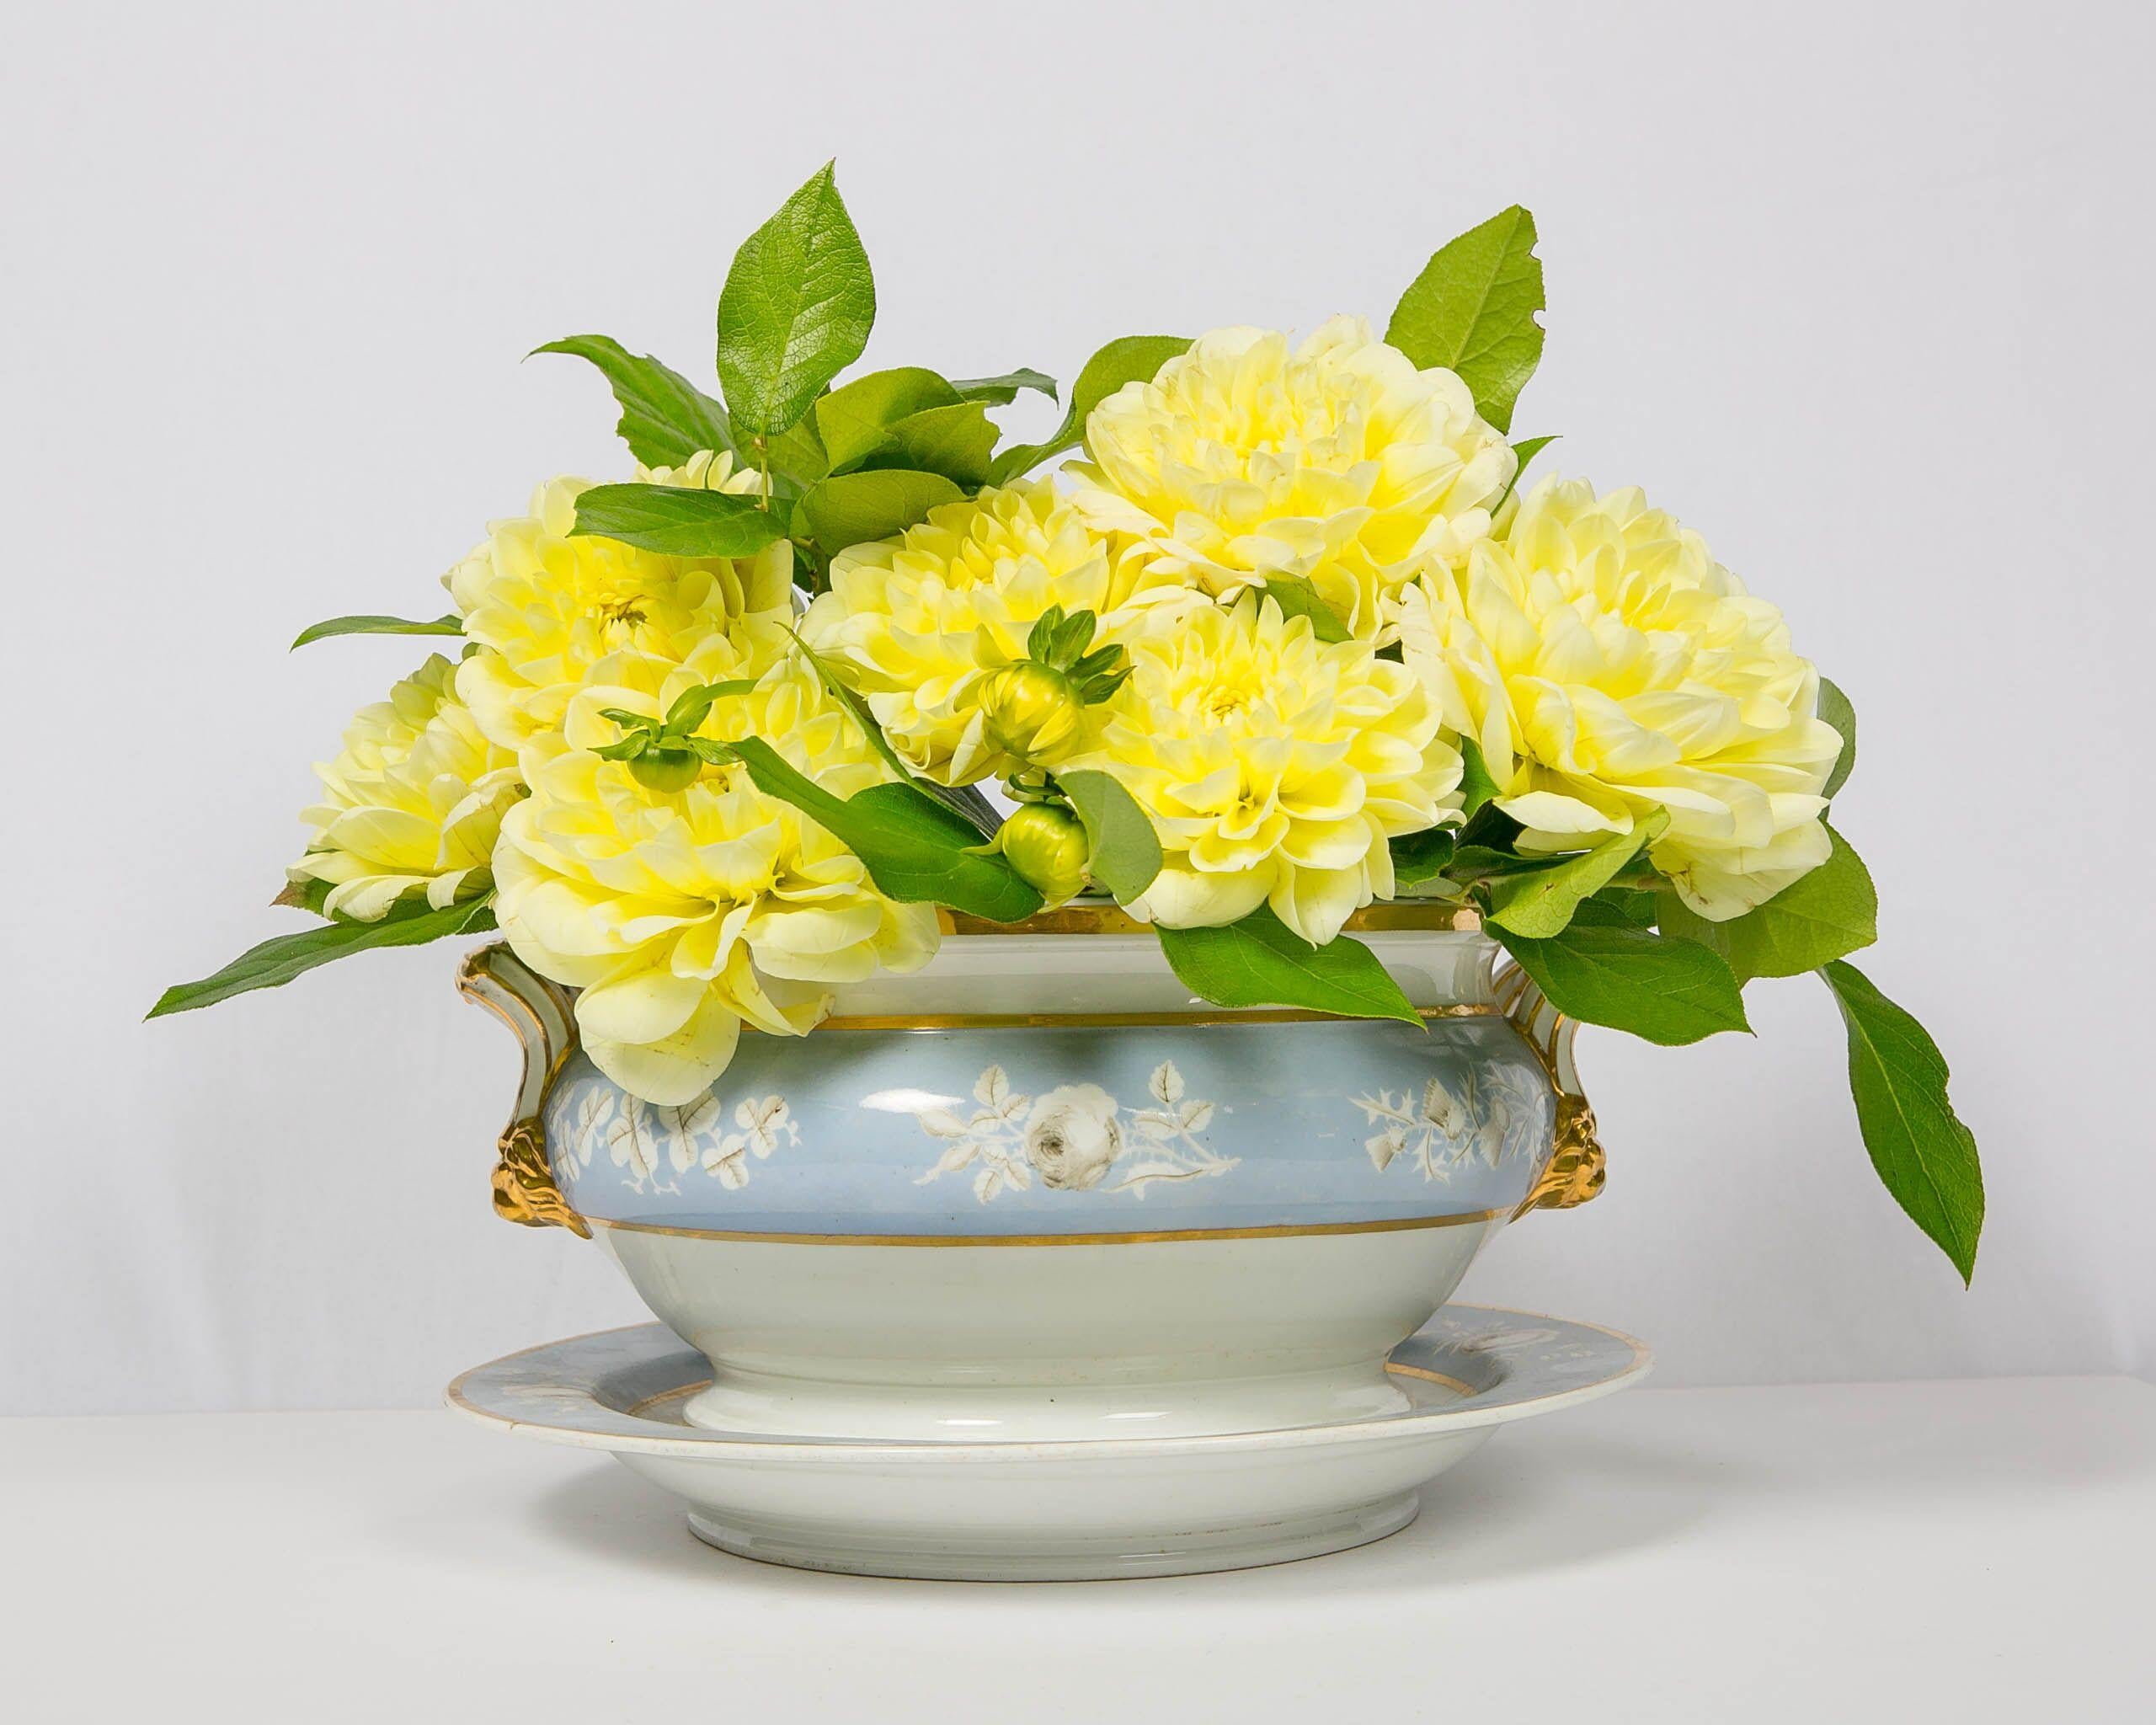 We are pleased to offer this standout Worcester soup tureen and stand painted in baby blue and decorated with white roses. The tureen is further decorated on the cover with lavish gold gilding which also decorates the finial and the handles. It was